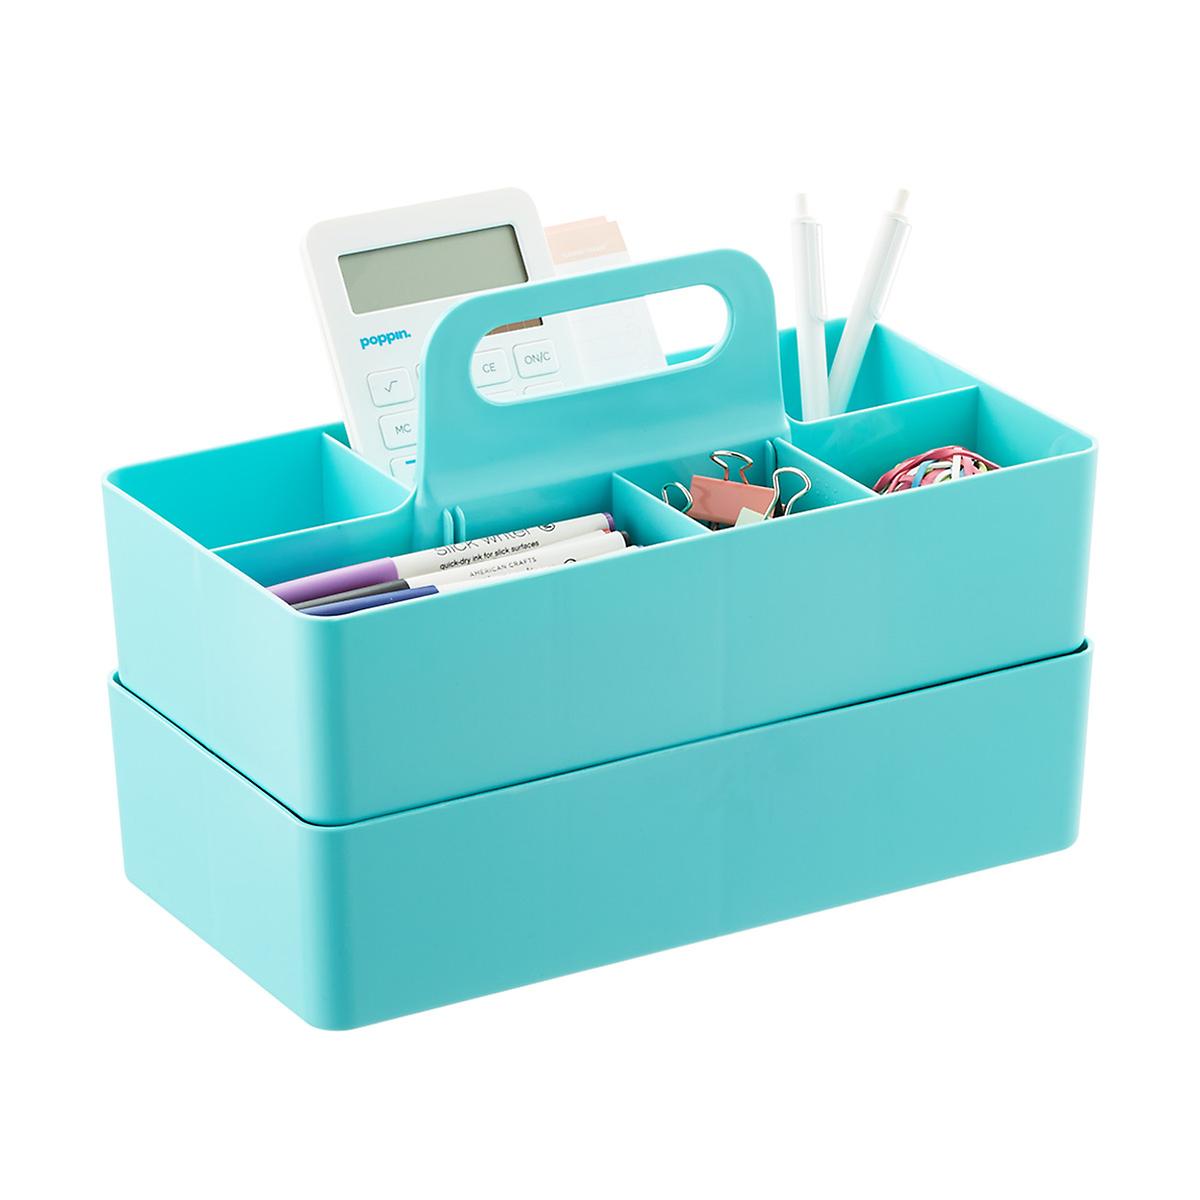 10070224-8-compartment-supply-caddy.jpg